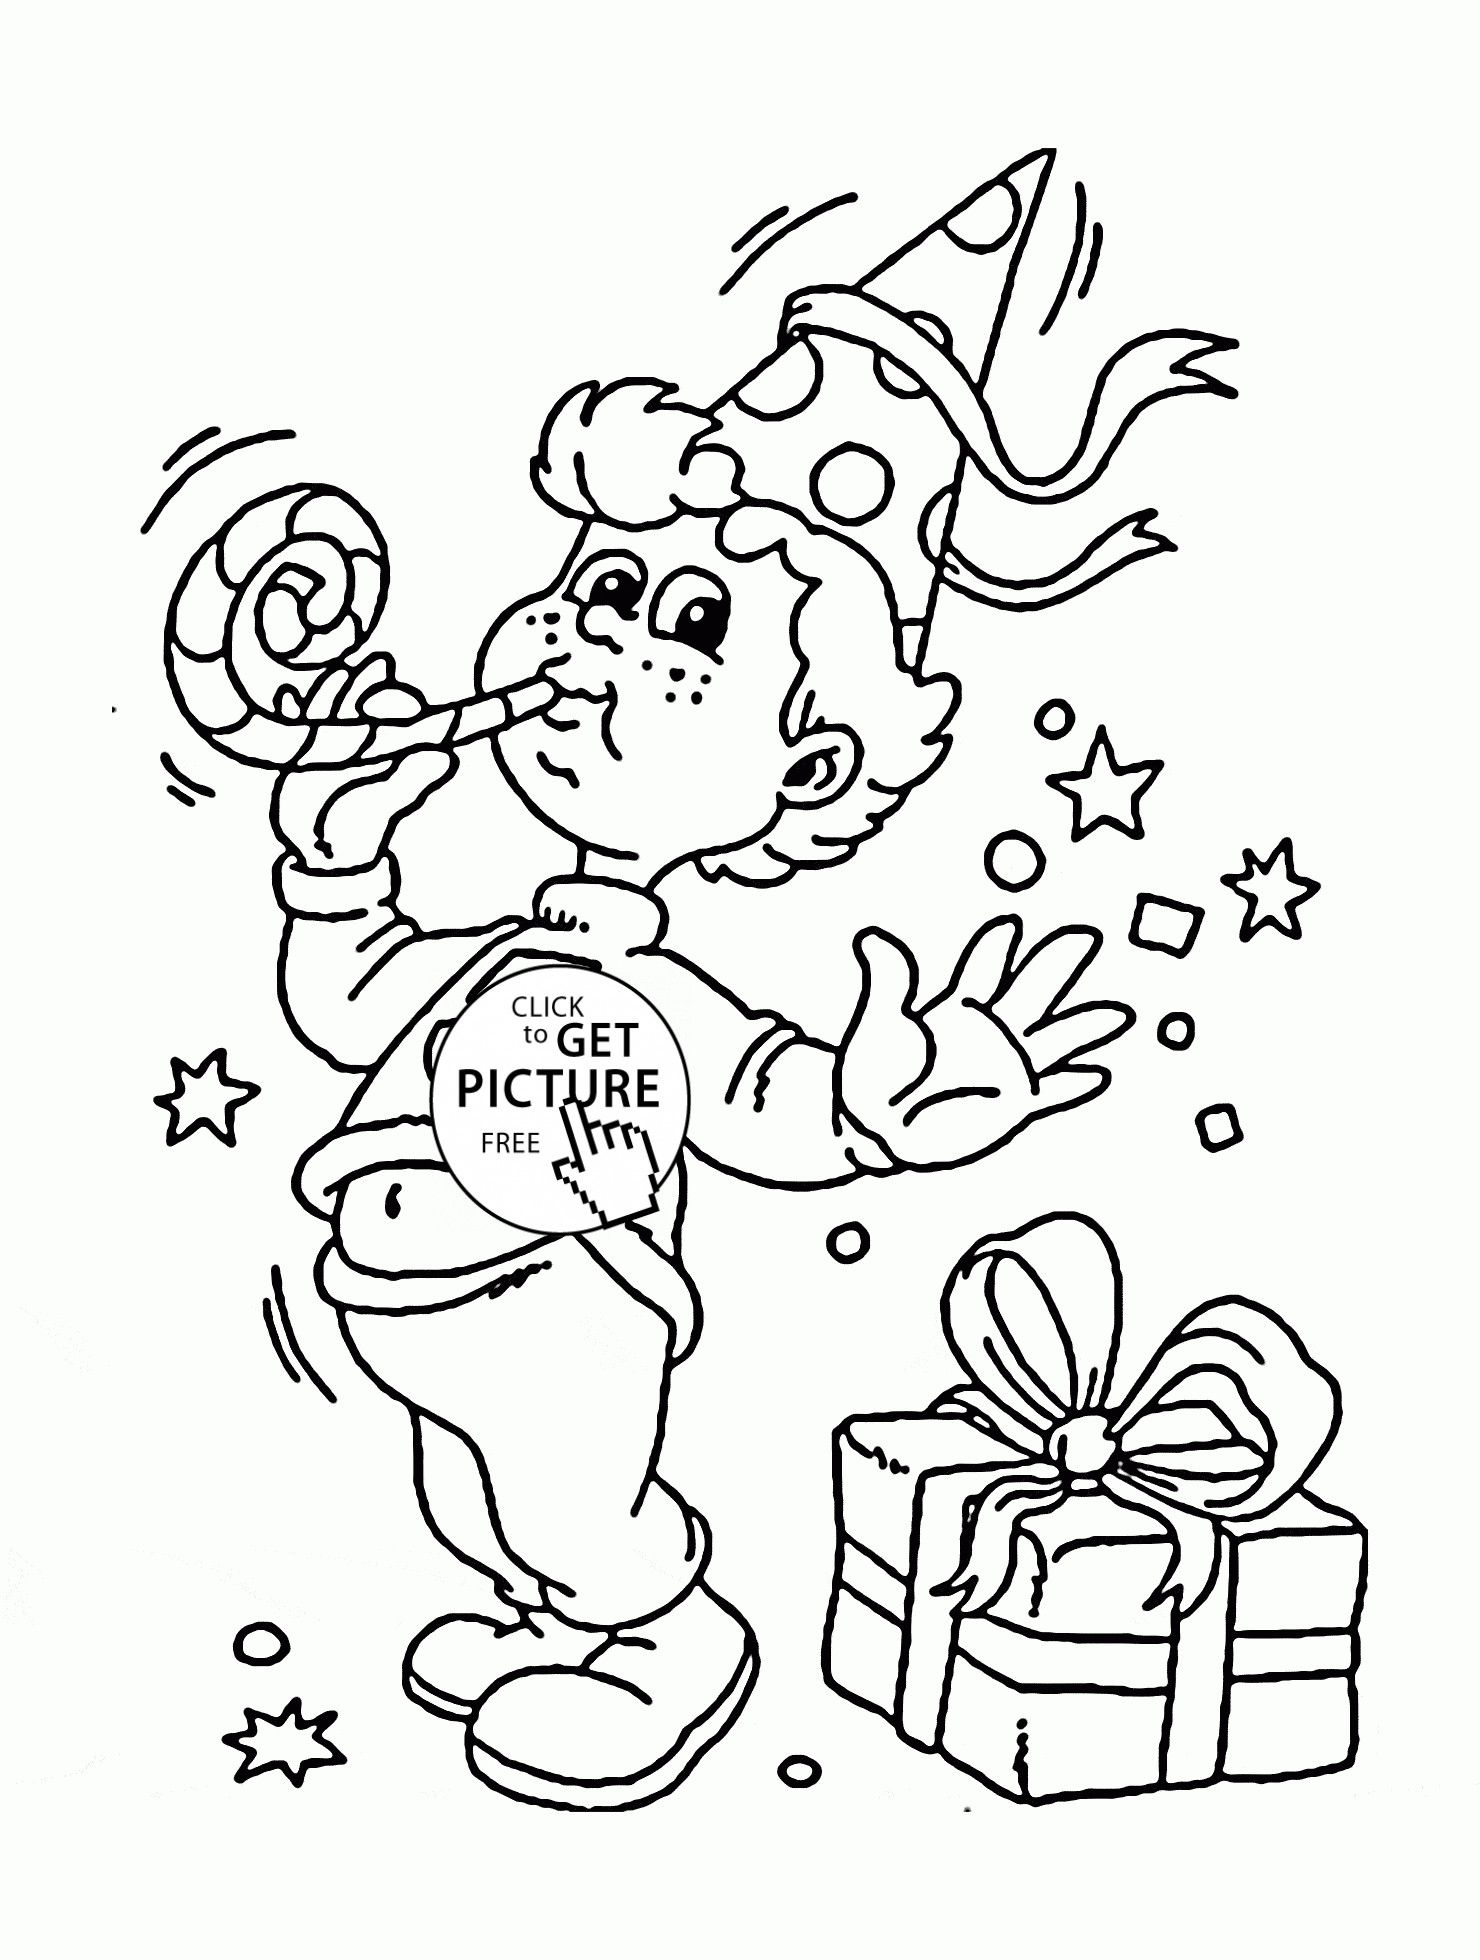 Birthday Coloring Pages For Boys
 Happy Birthday Coloring Pages For Boys bell rehwoldt